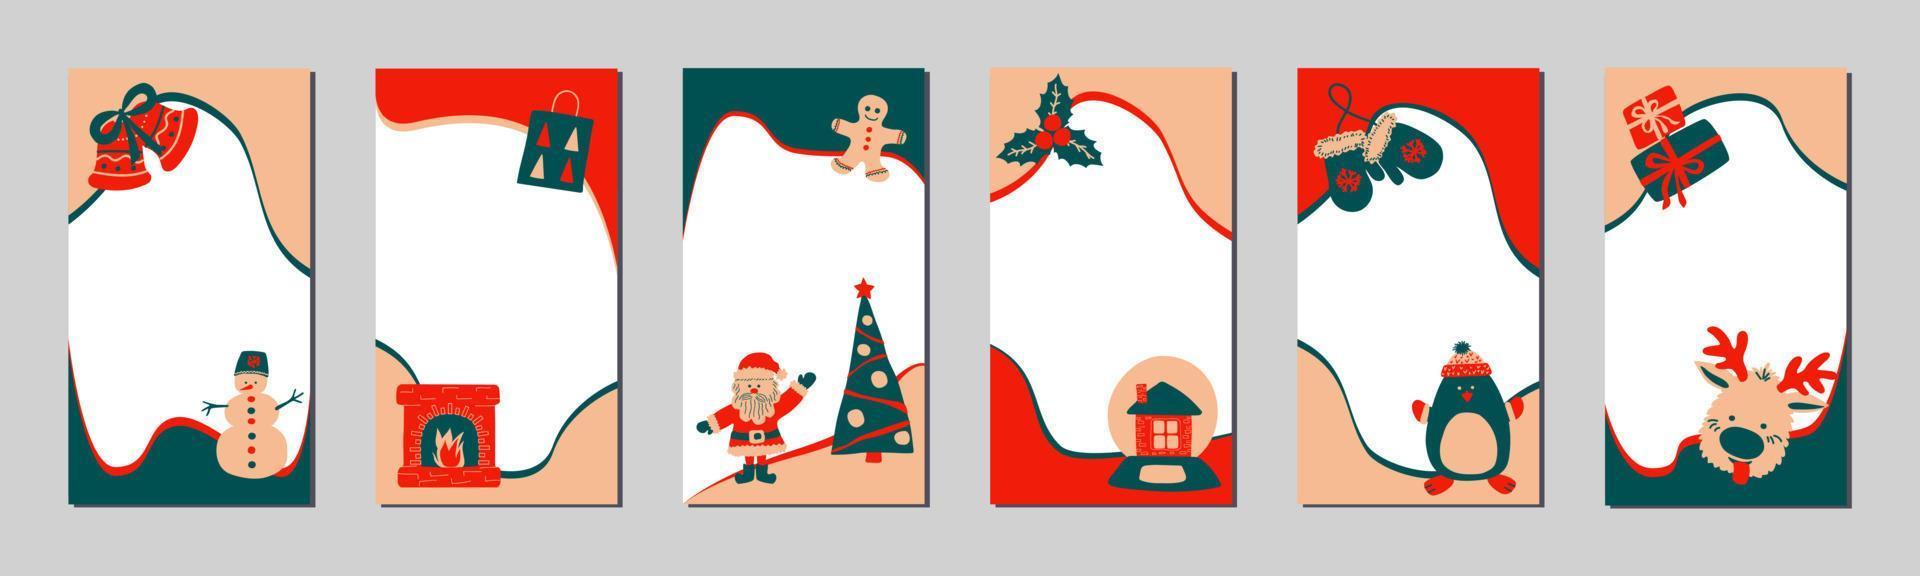 Christmas stories template for social networks in the style of Scandinavian simple hand drawing. Holiday frames for photo with cute characters - Santa, reindeer, gingerbread man, snowman, penguin. vector